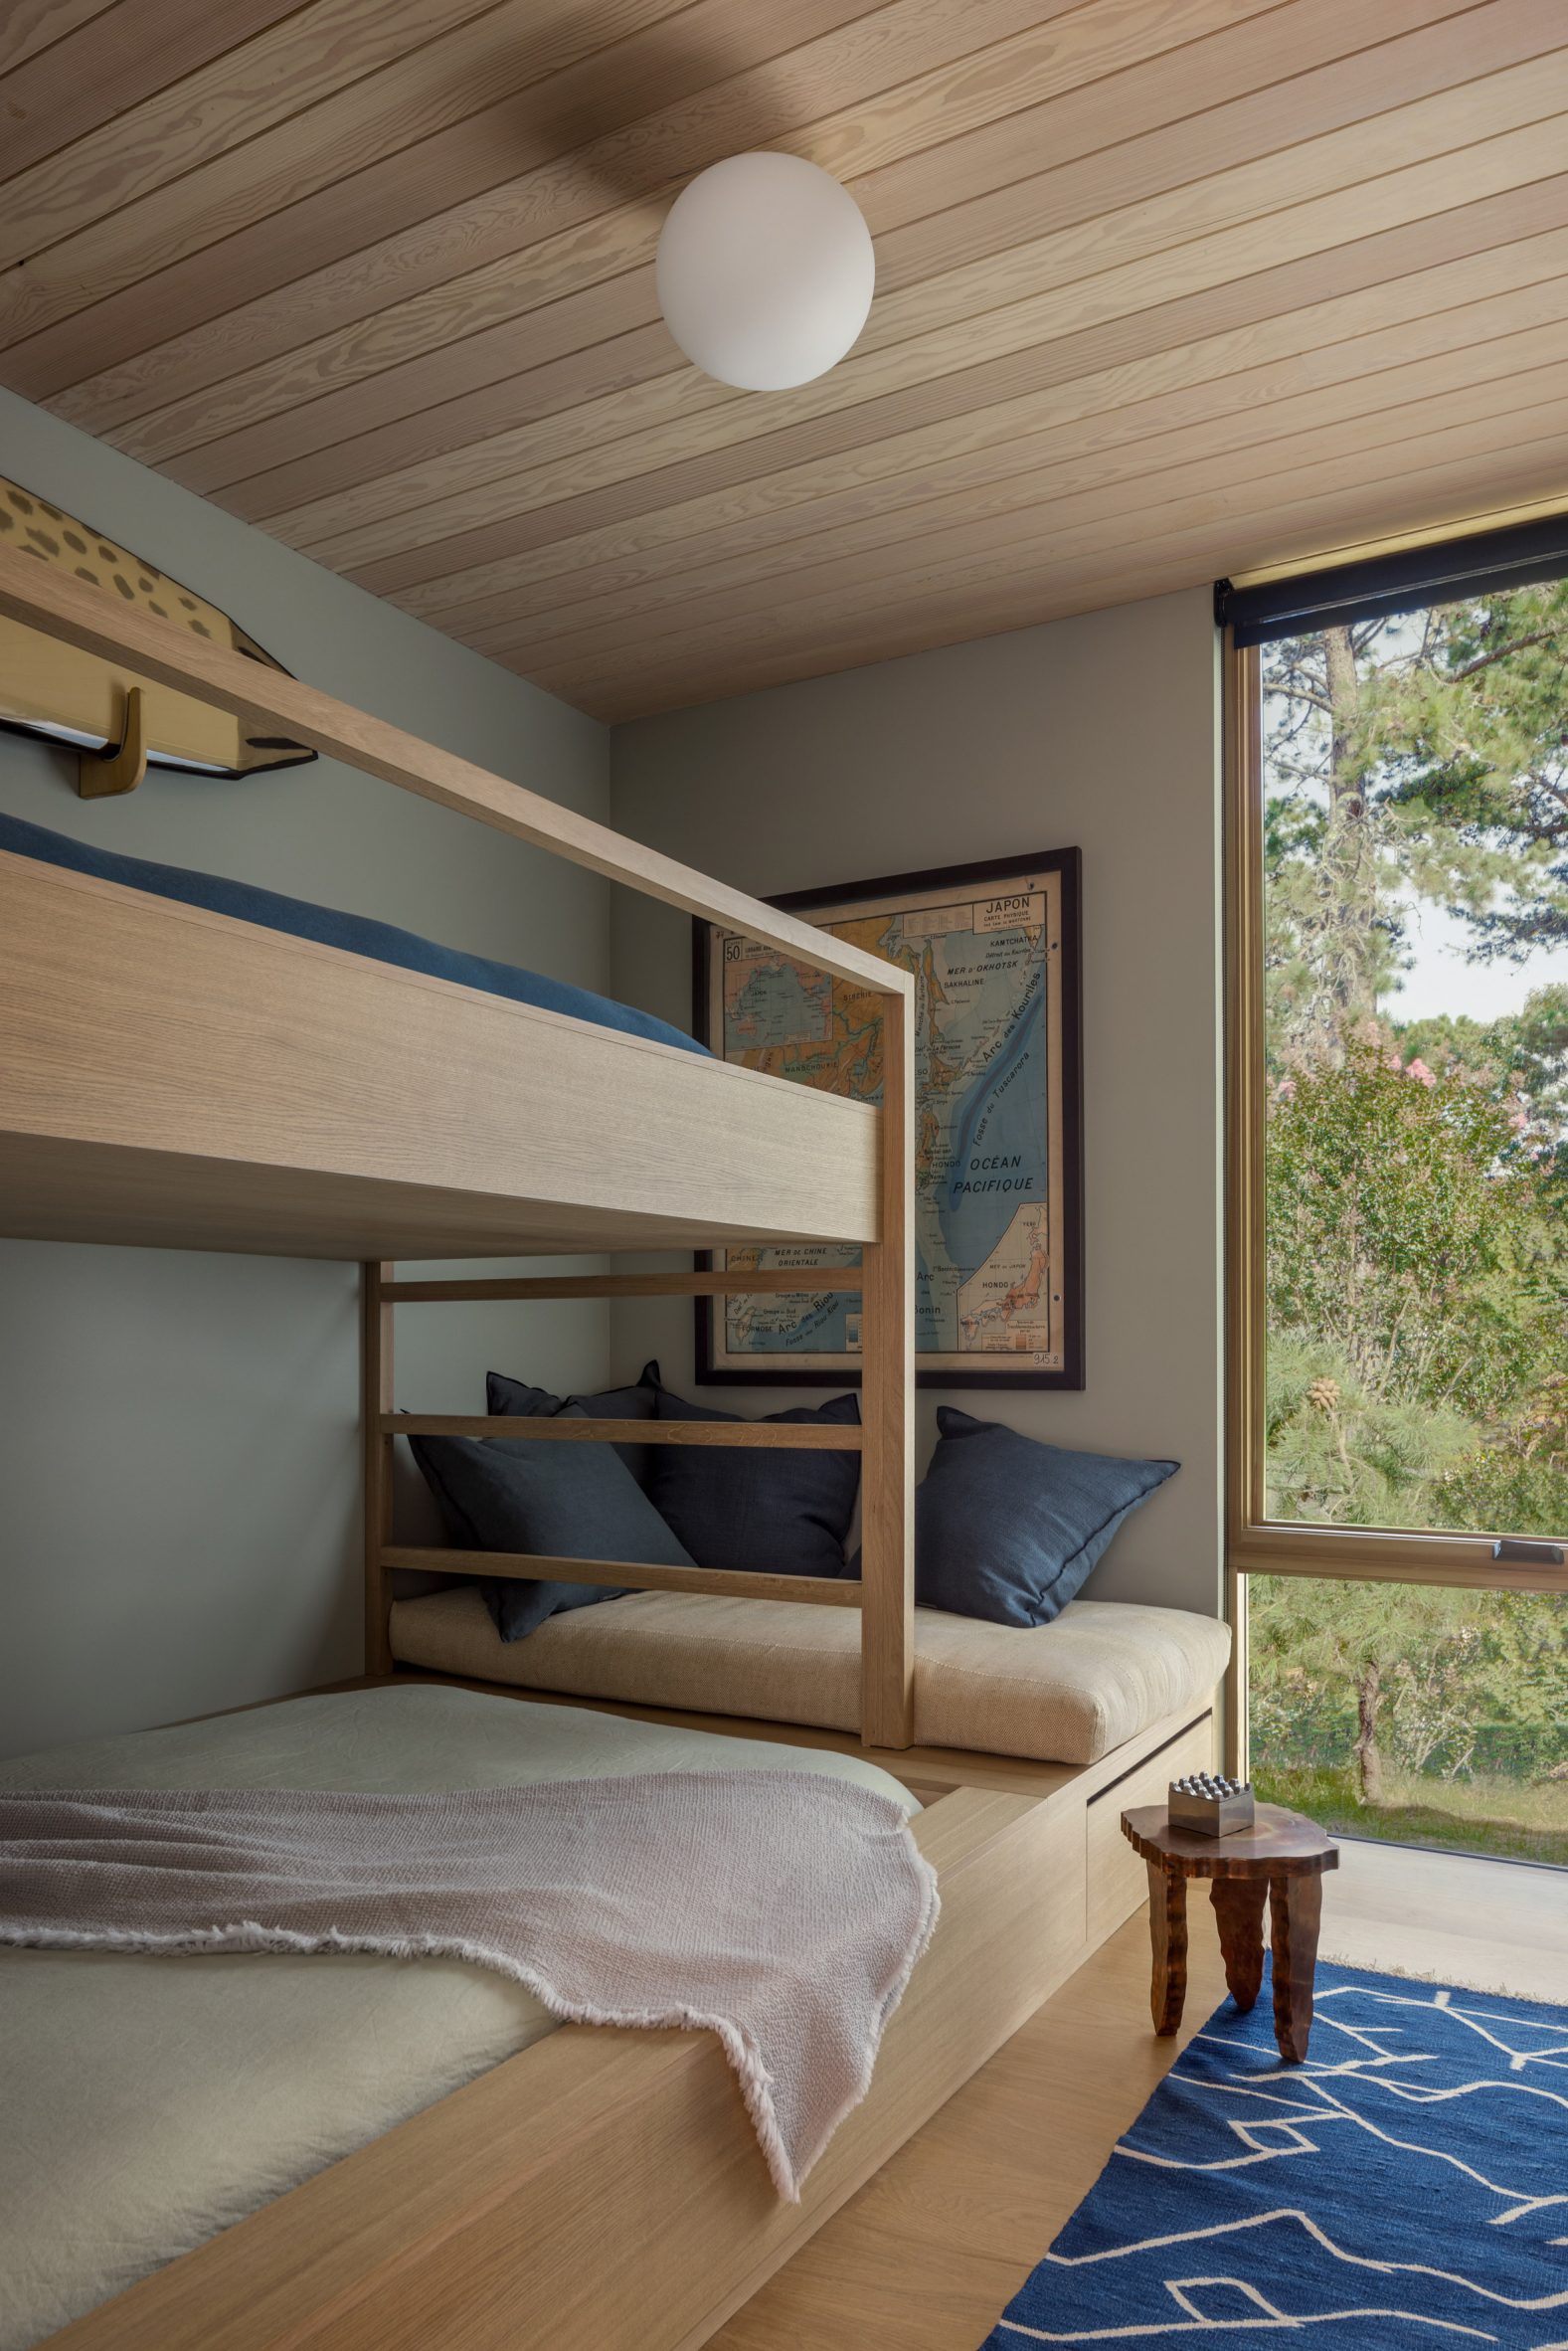 Wooden bunk bed with view through full-height window